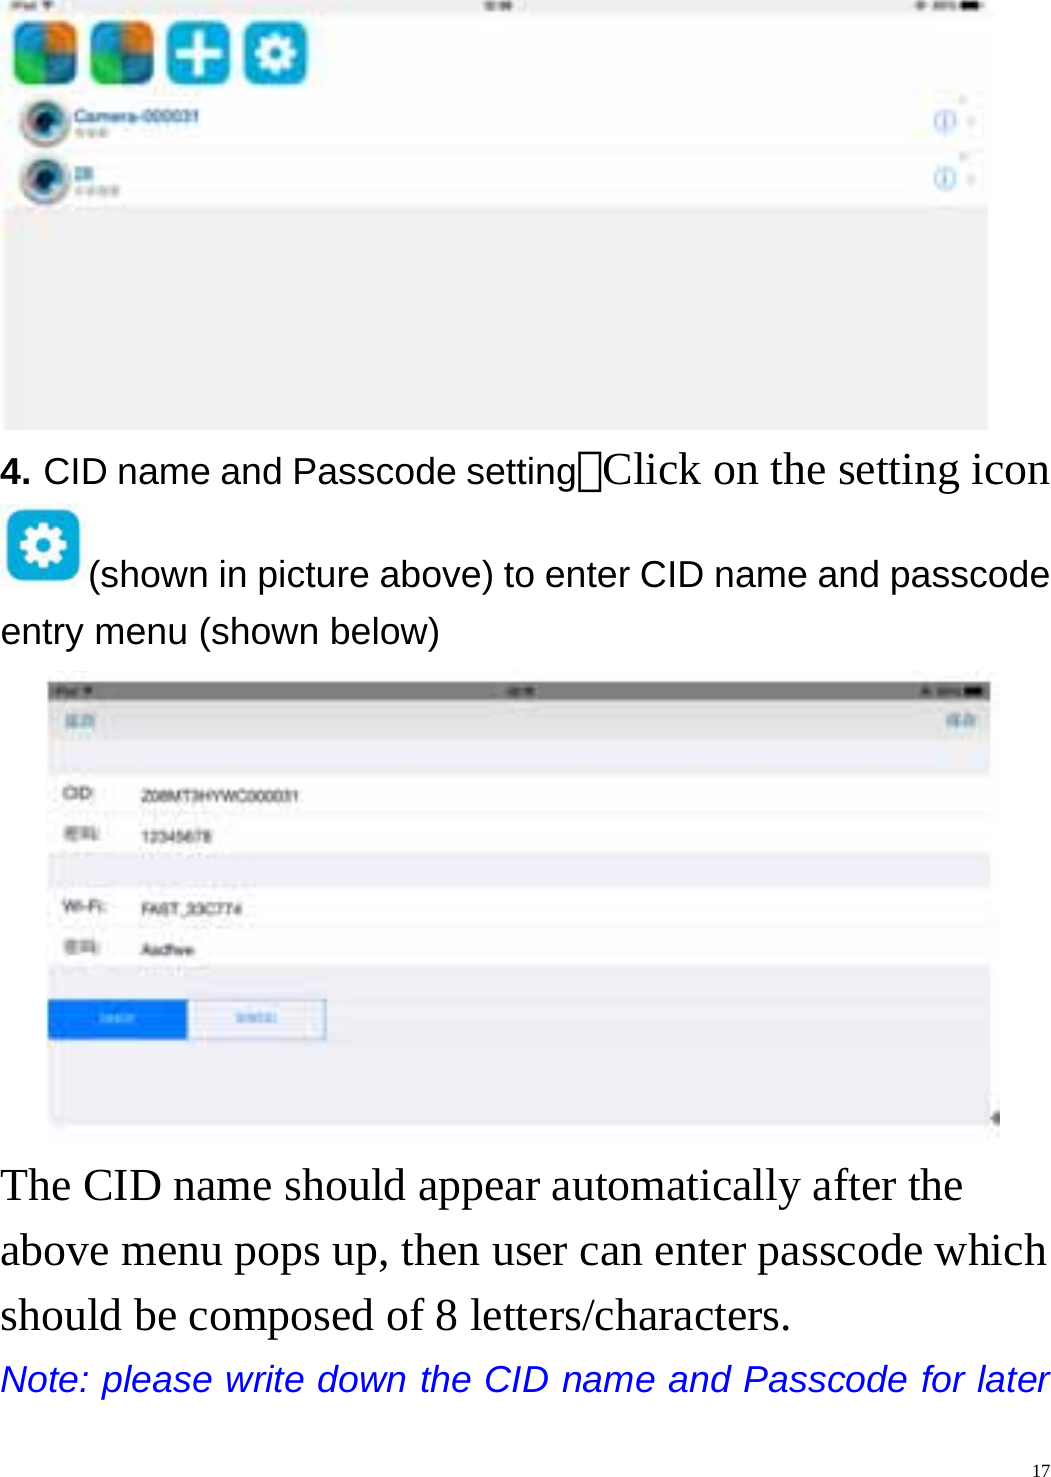    17 4. CID name and Passcode setting：Click on the setting icon (shown in picture above) to enter CID name and passcode entry menu (shown below)  The CID name should appear automatically after the above menu pops up, then user can enter passcode which should be composed of 8 letters/characters. Note: please write down the CID name and Passcode for later 